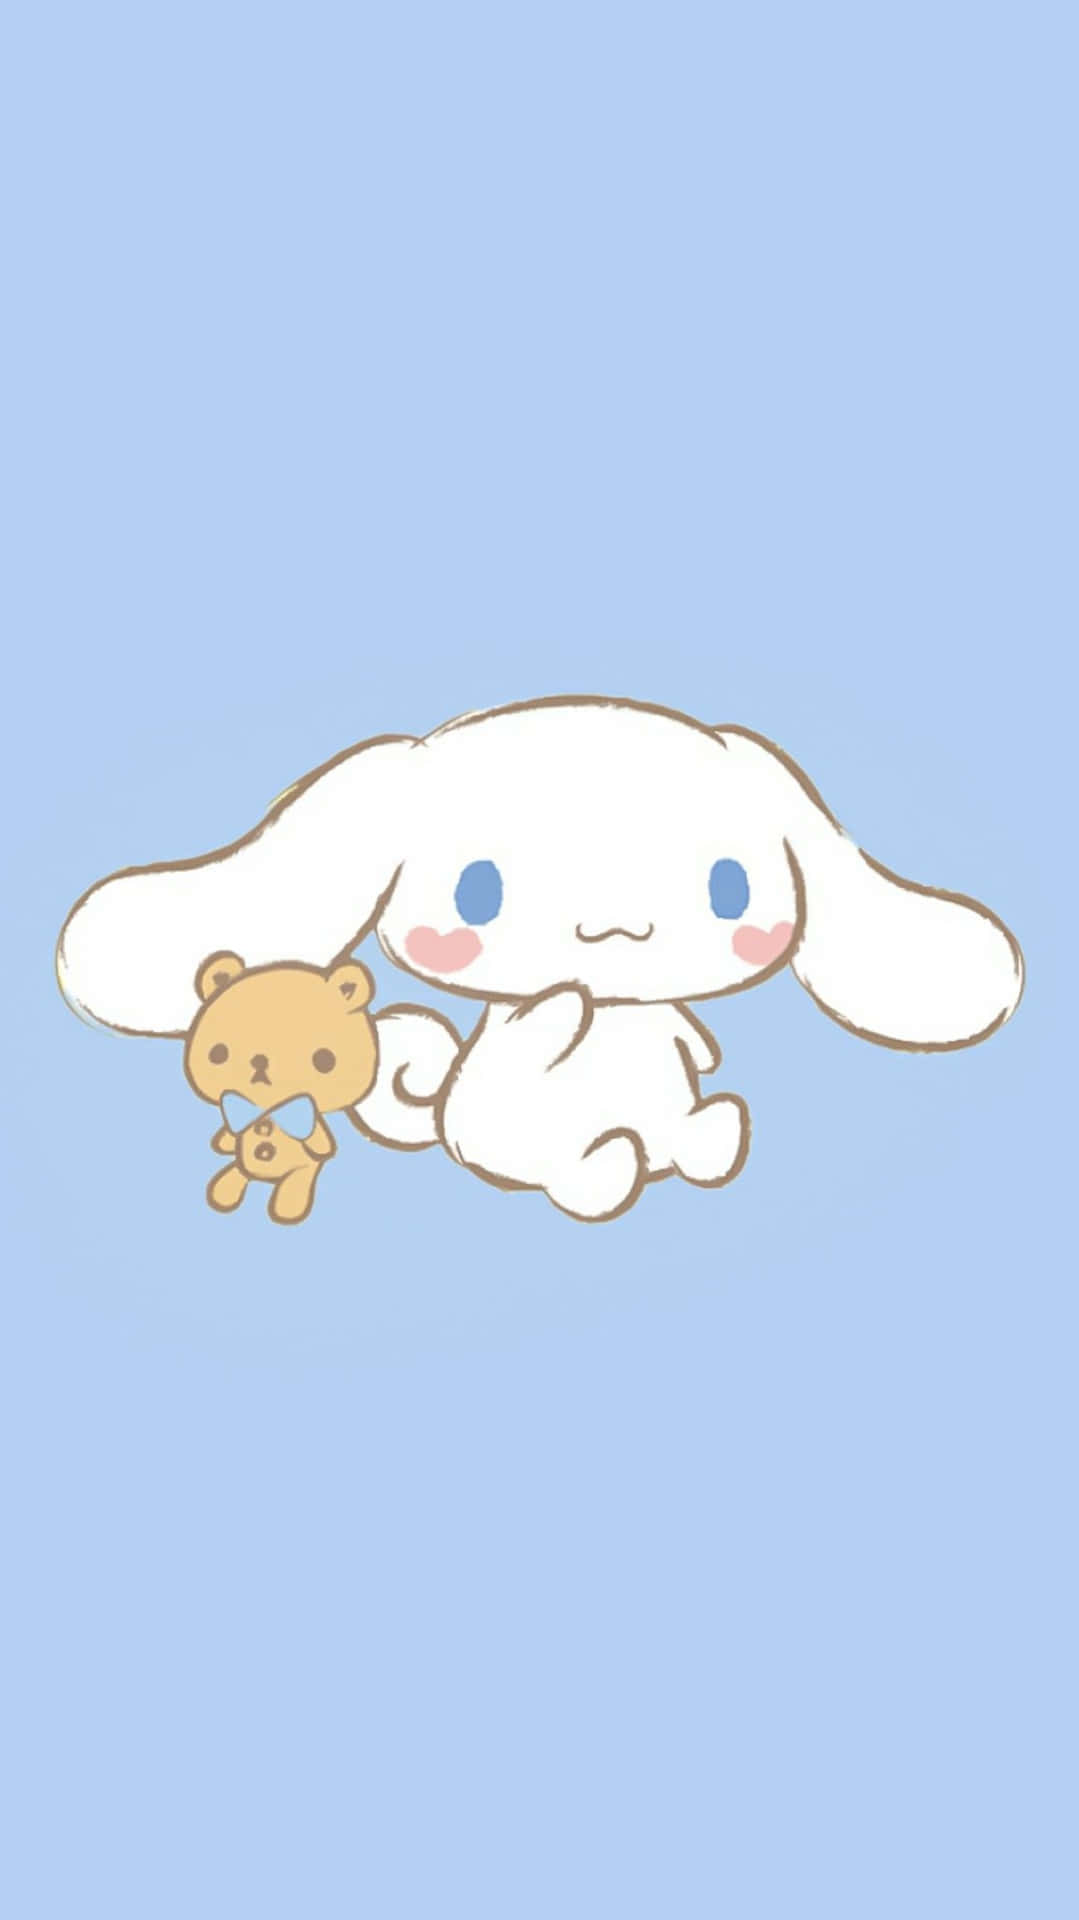 Have an adorably sweet phone with Cinnamoroll Wallpaper